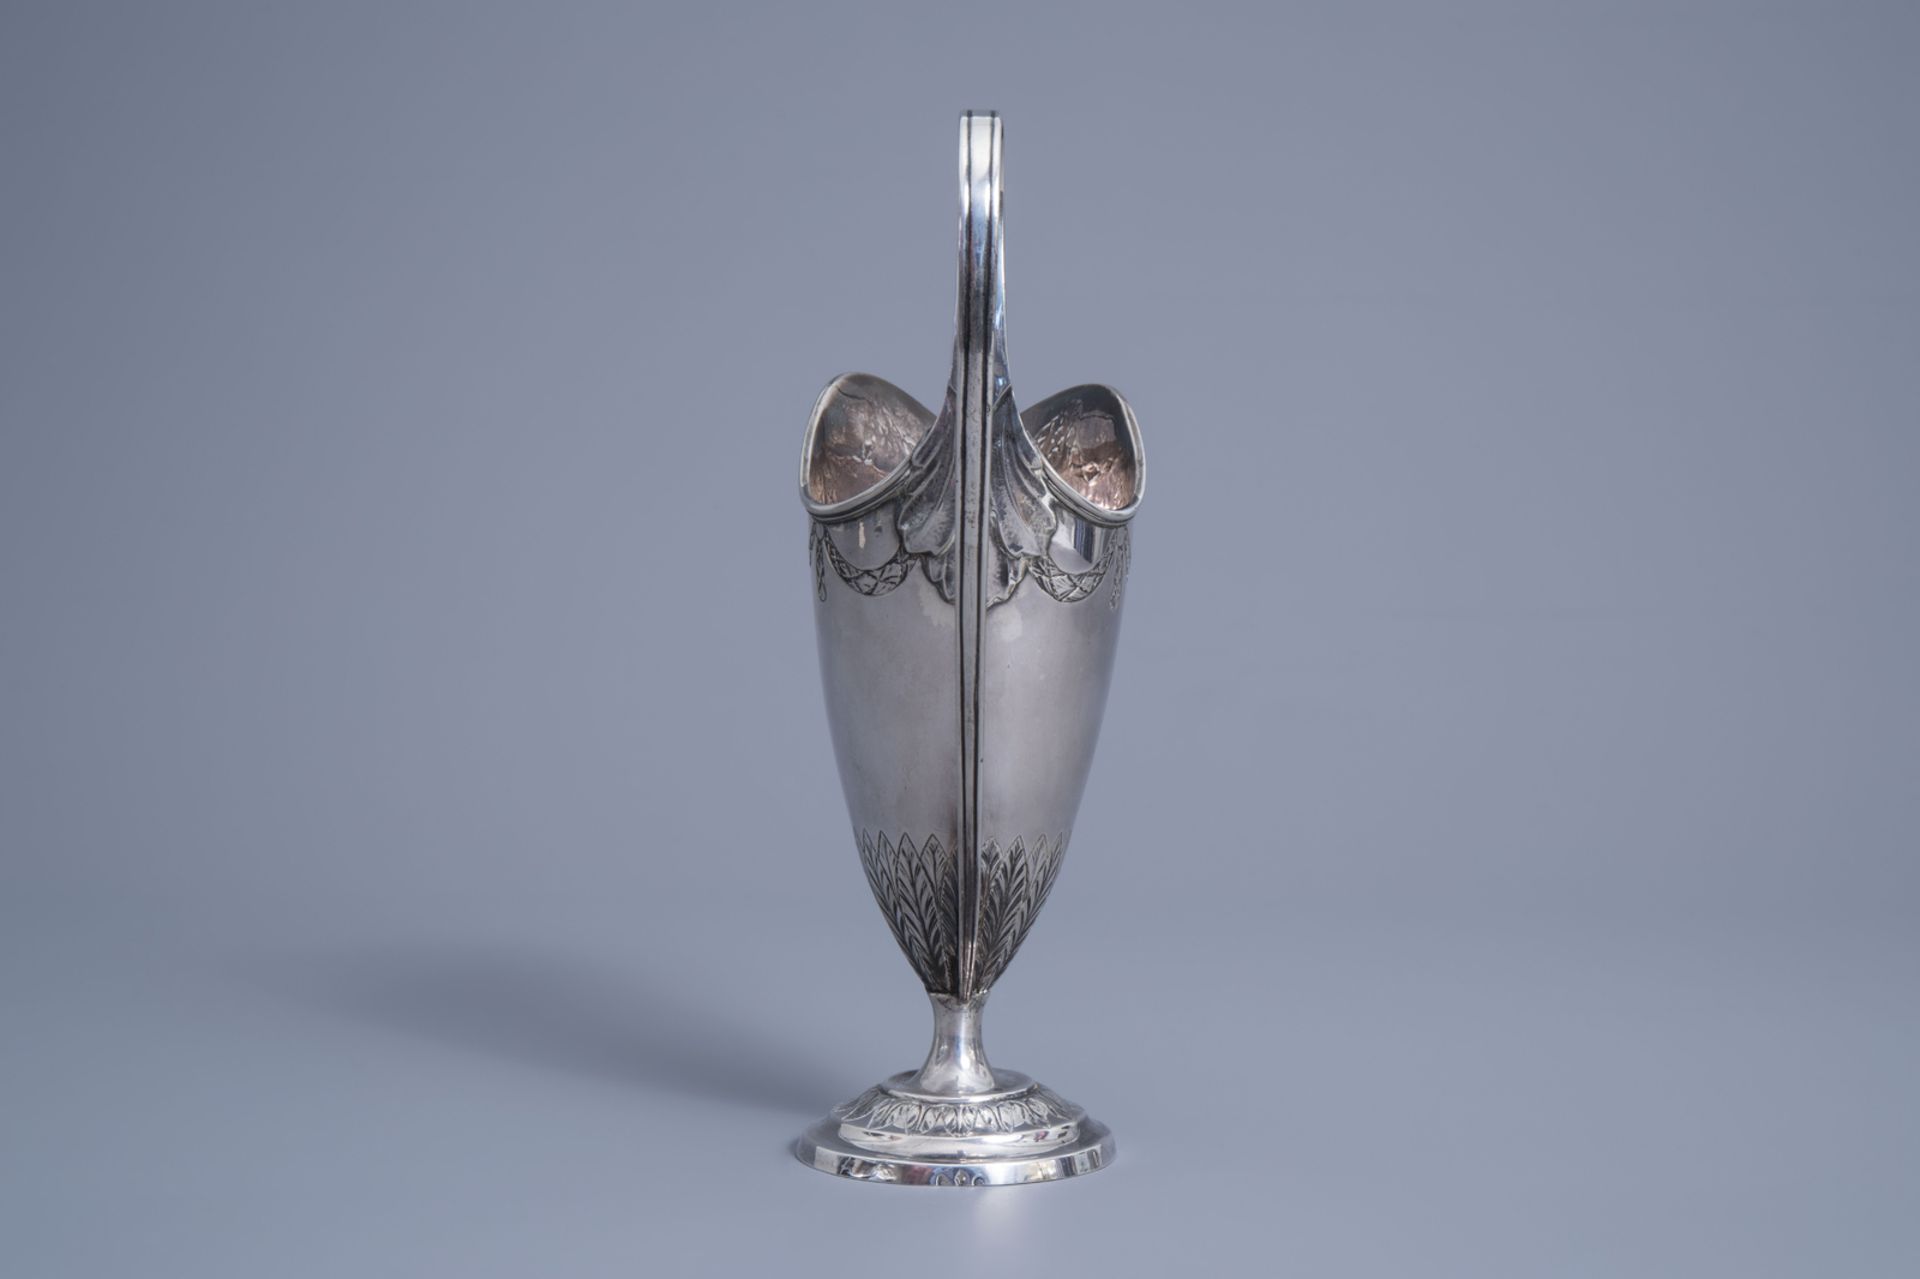 A French Neoclassic silver jug, maker's mark V with a flower, 18th/19th C. - Image 3 of 8